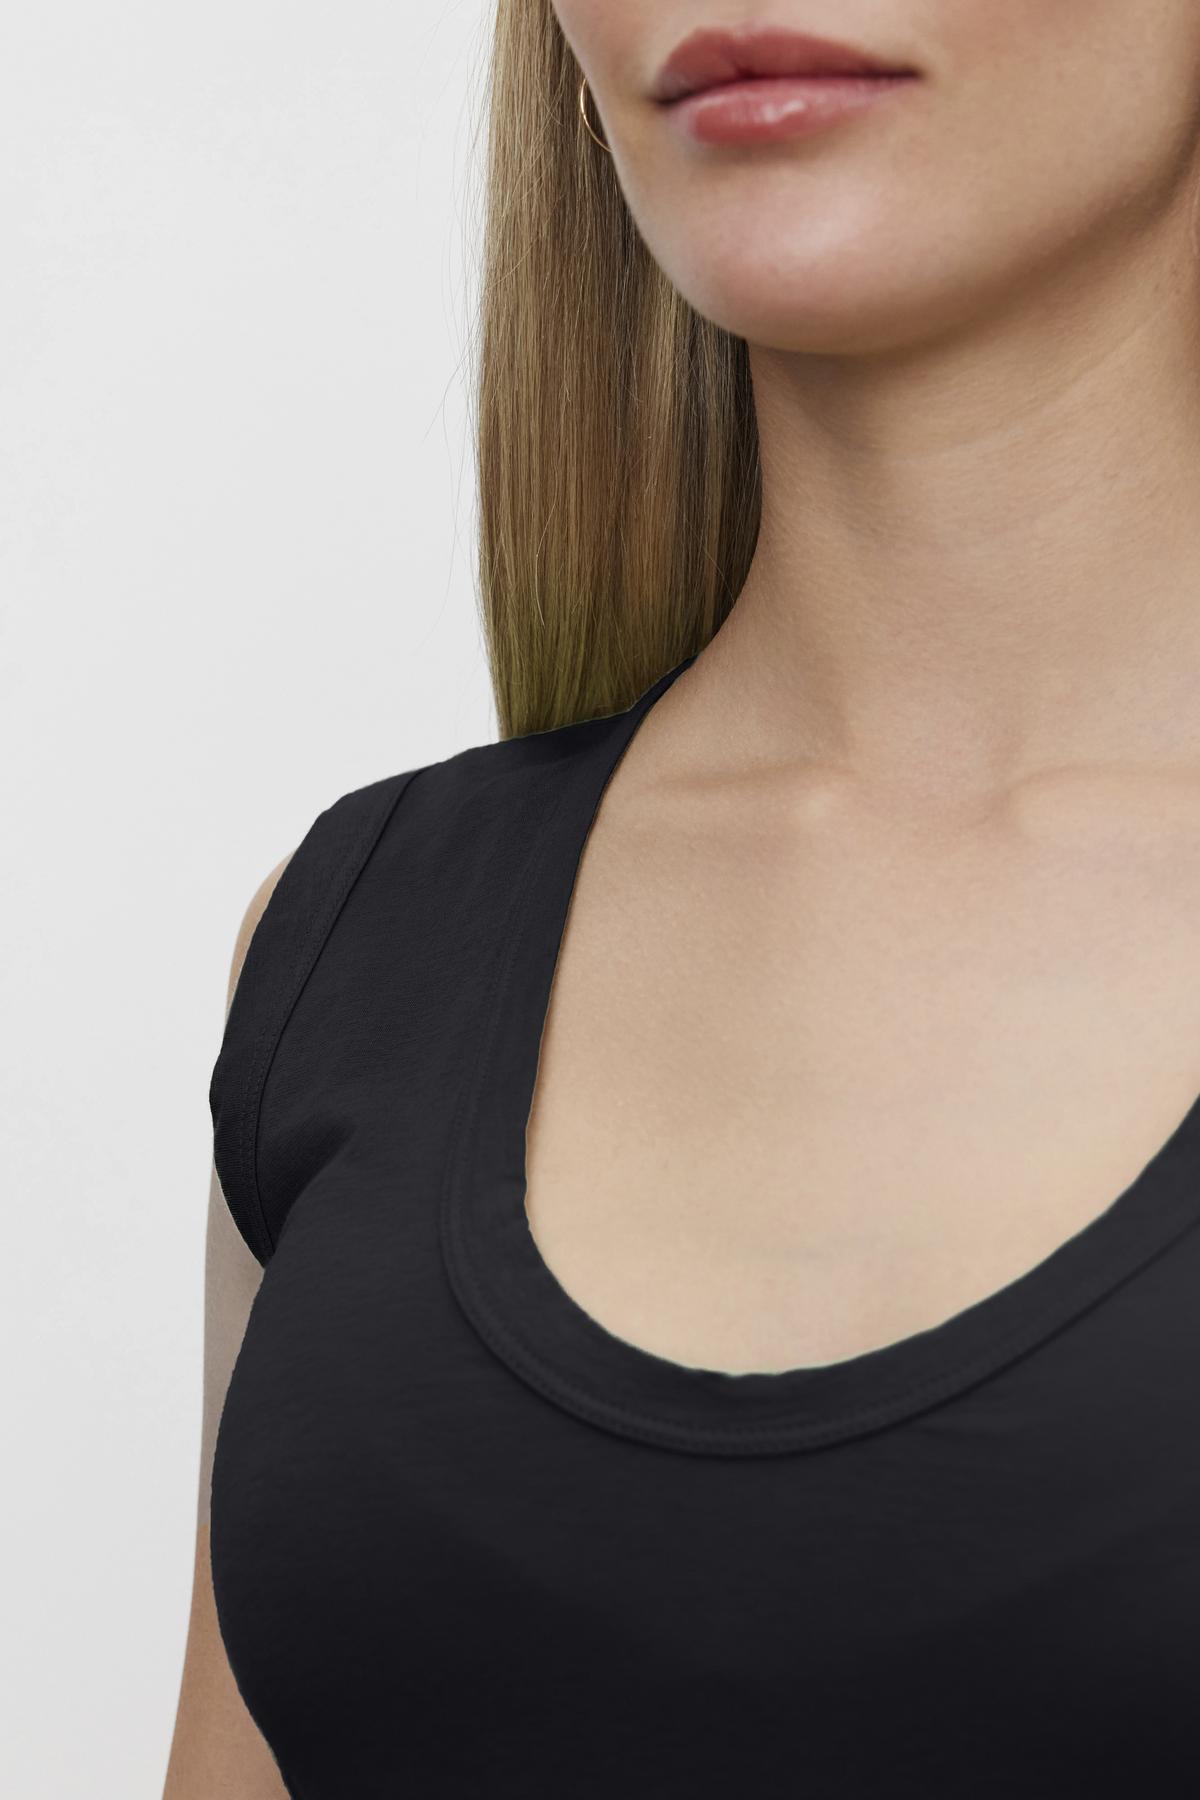   Close-up of a woman wearing a black ESTINA TANK TOP by Velvet by Graham & Spencer, showcasing the neckline and part of her face, with straight, light brunette hair against a plain background. 